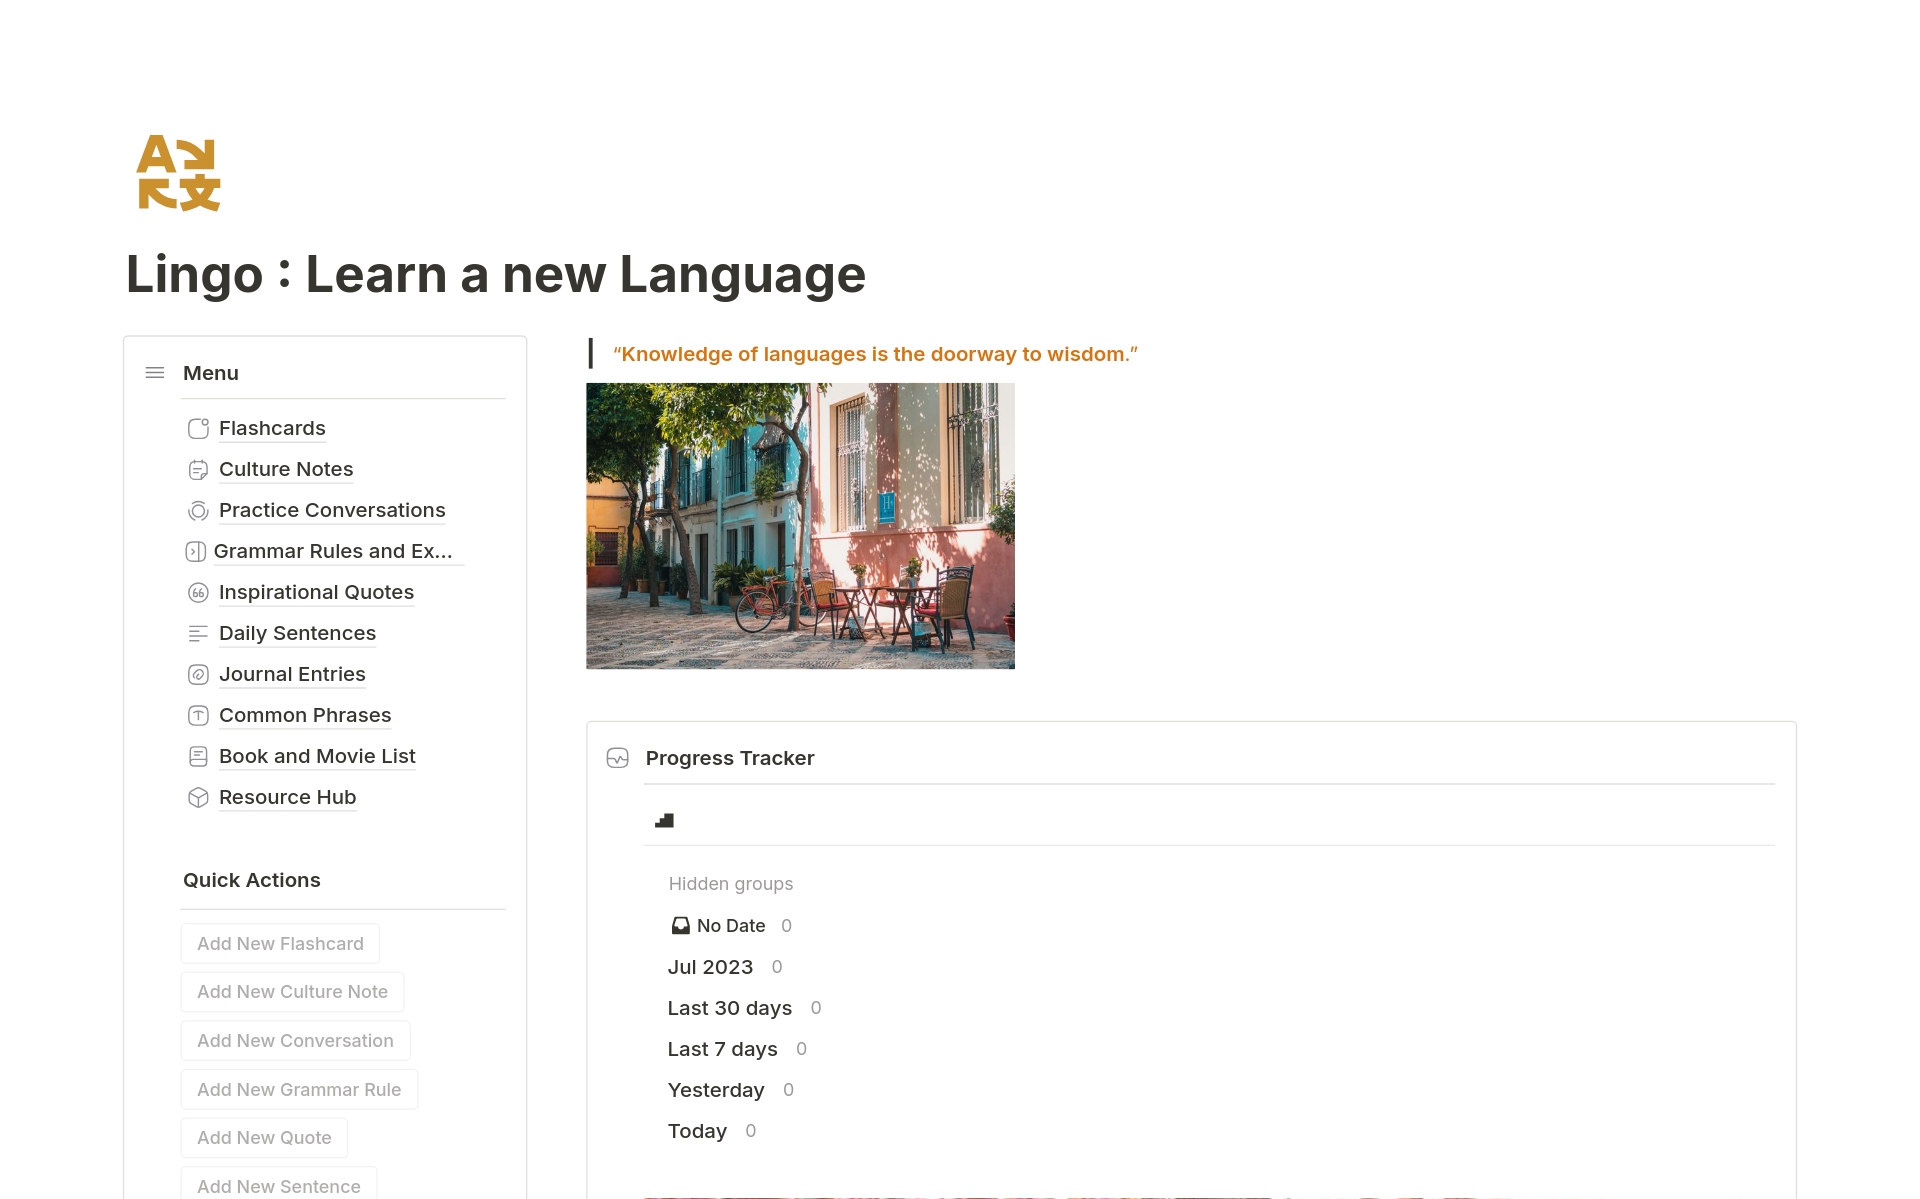 Learning a new language should not be overwhelming. With this language learning notion template, make your journey stress free.

Get the template and learn a new language stress free.  